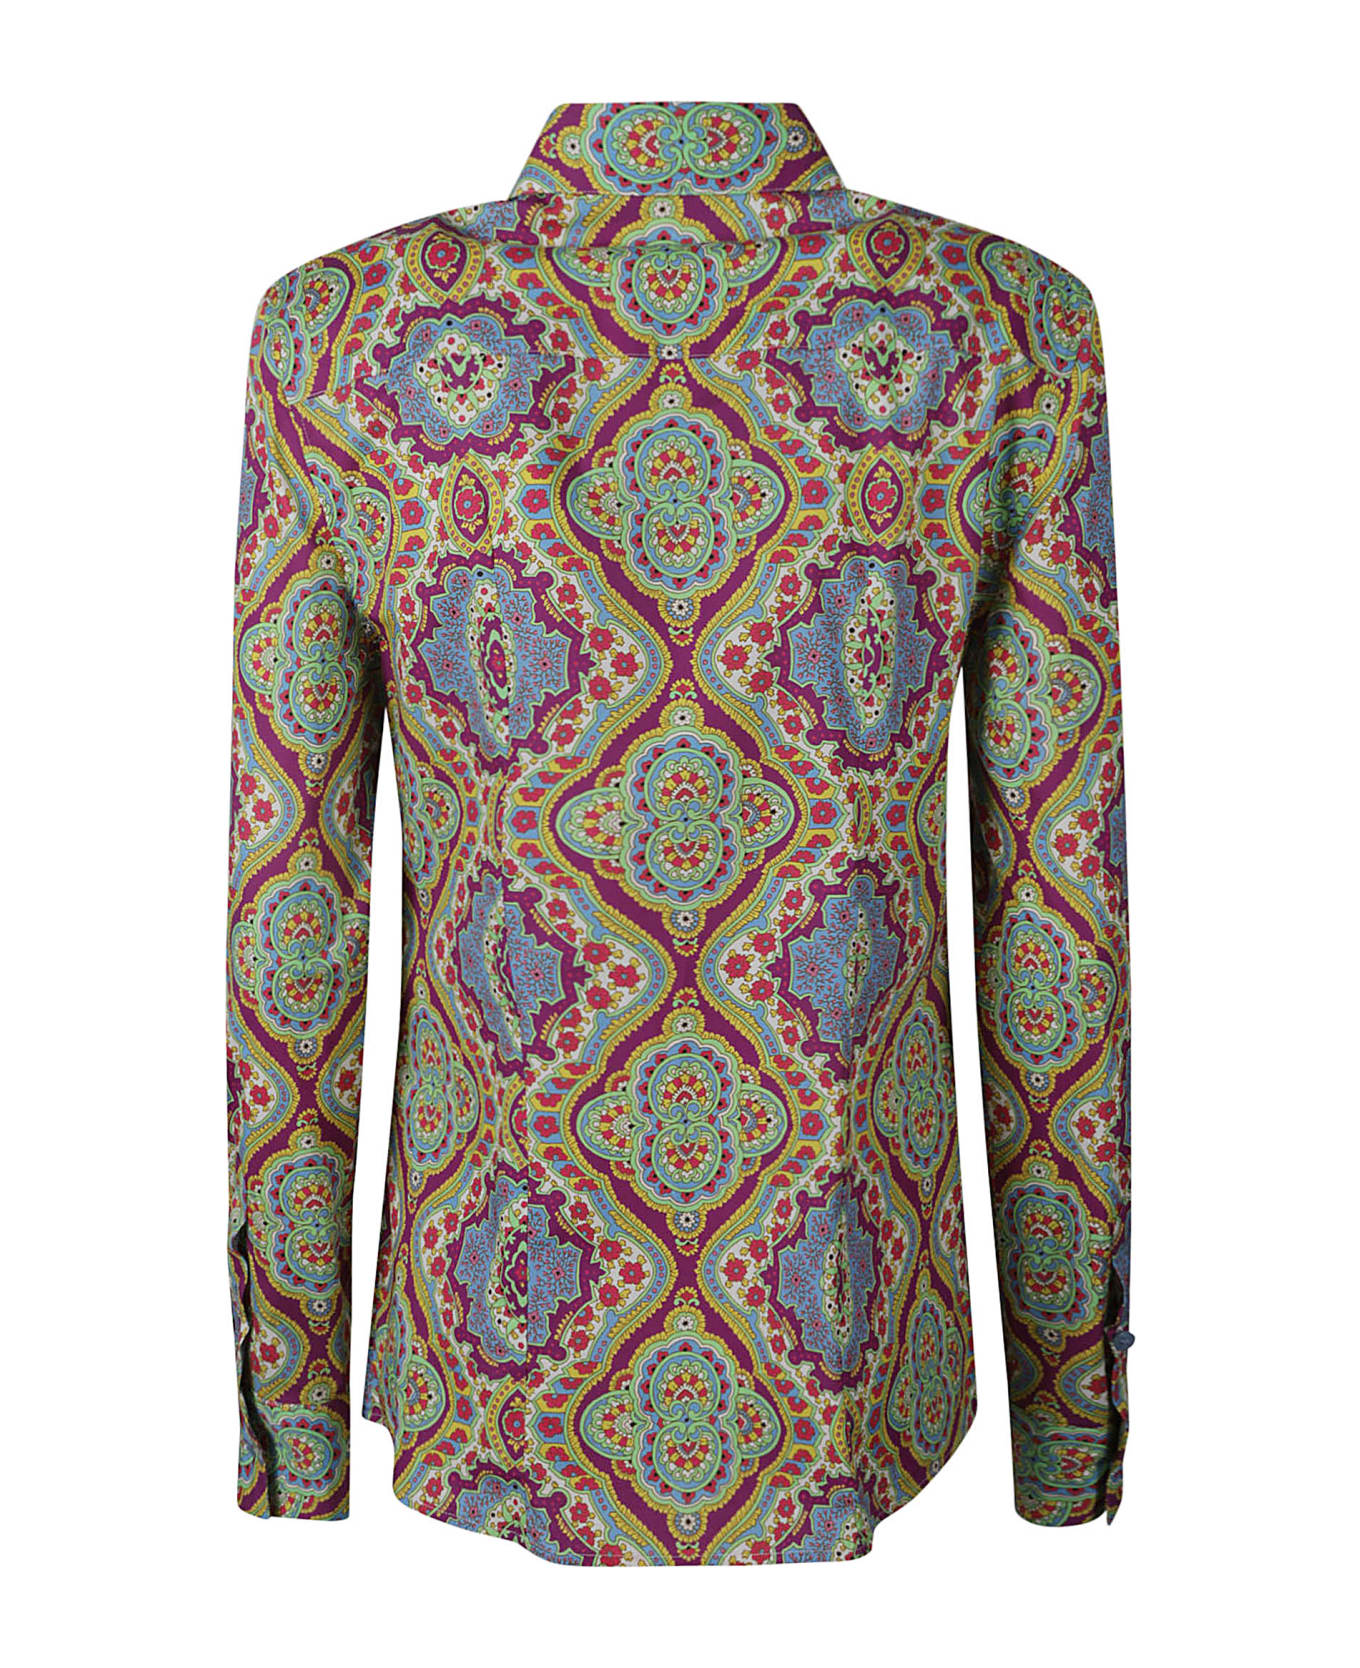 Etro Graphic Printed Buttoned Shirt - Multicolor シャツ